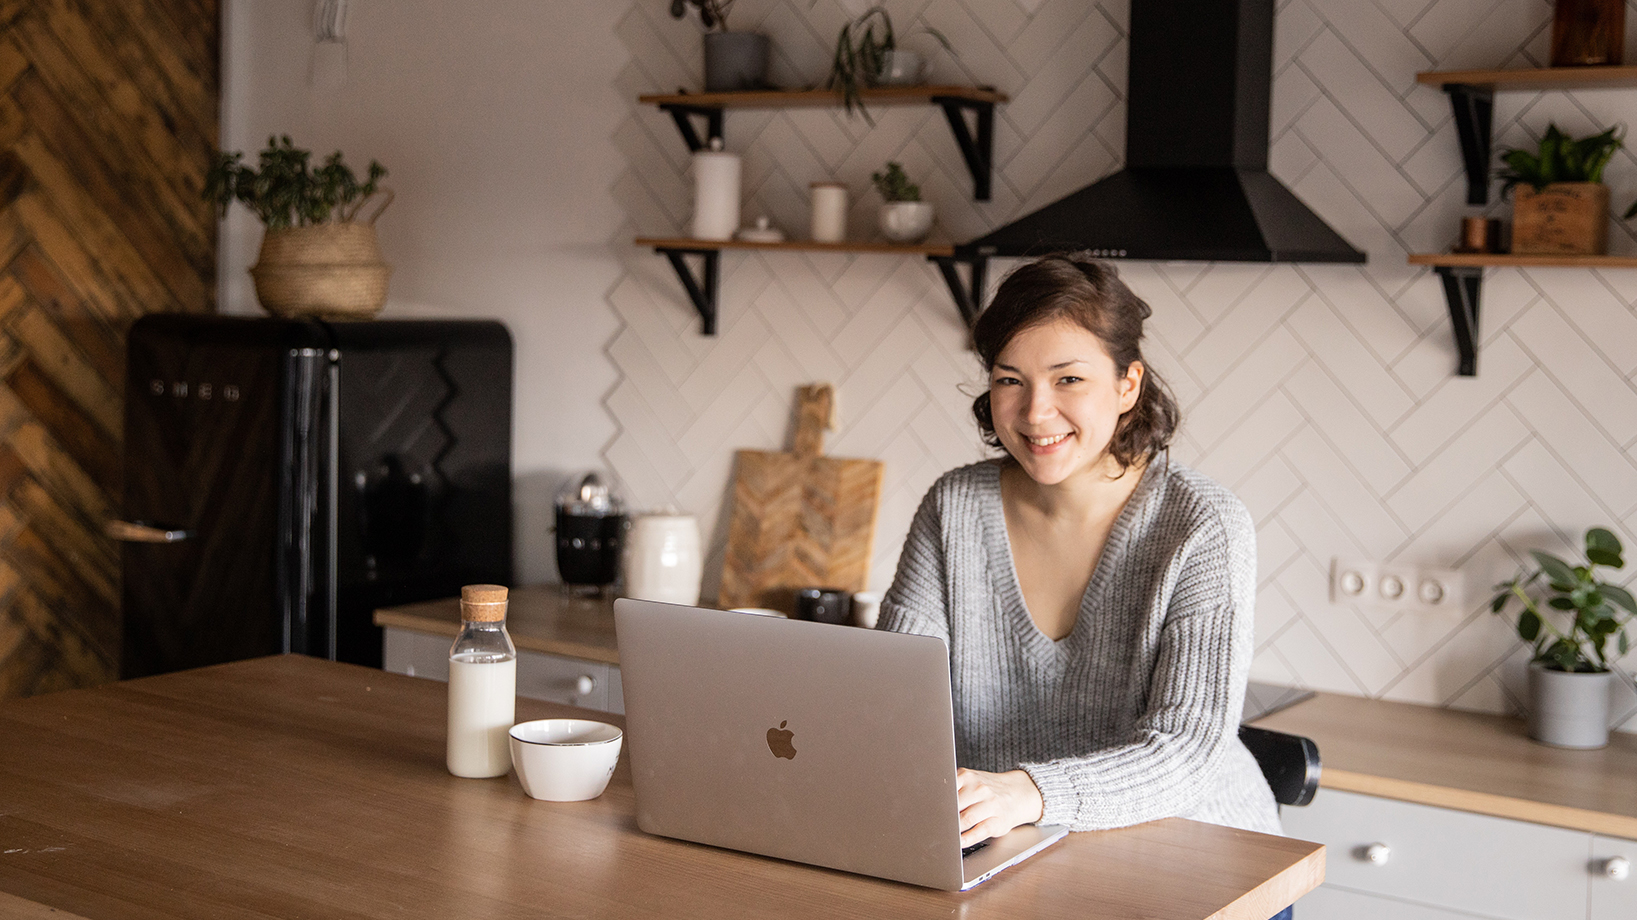 woman looking at the camera smiling while working on a laptop at a kitchen counter